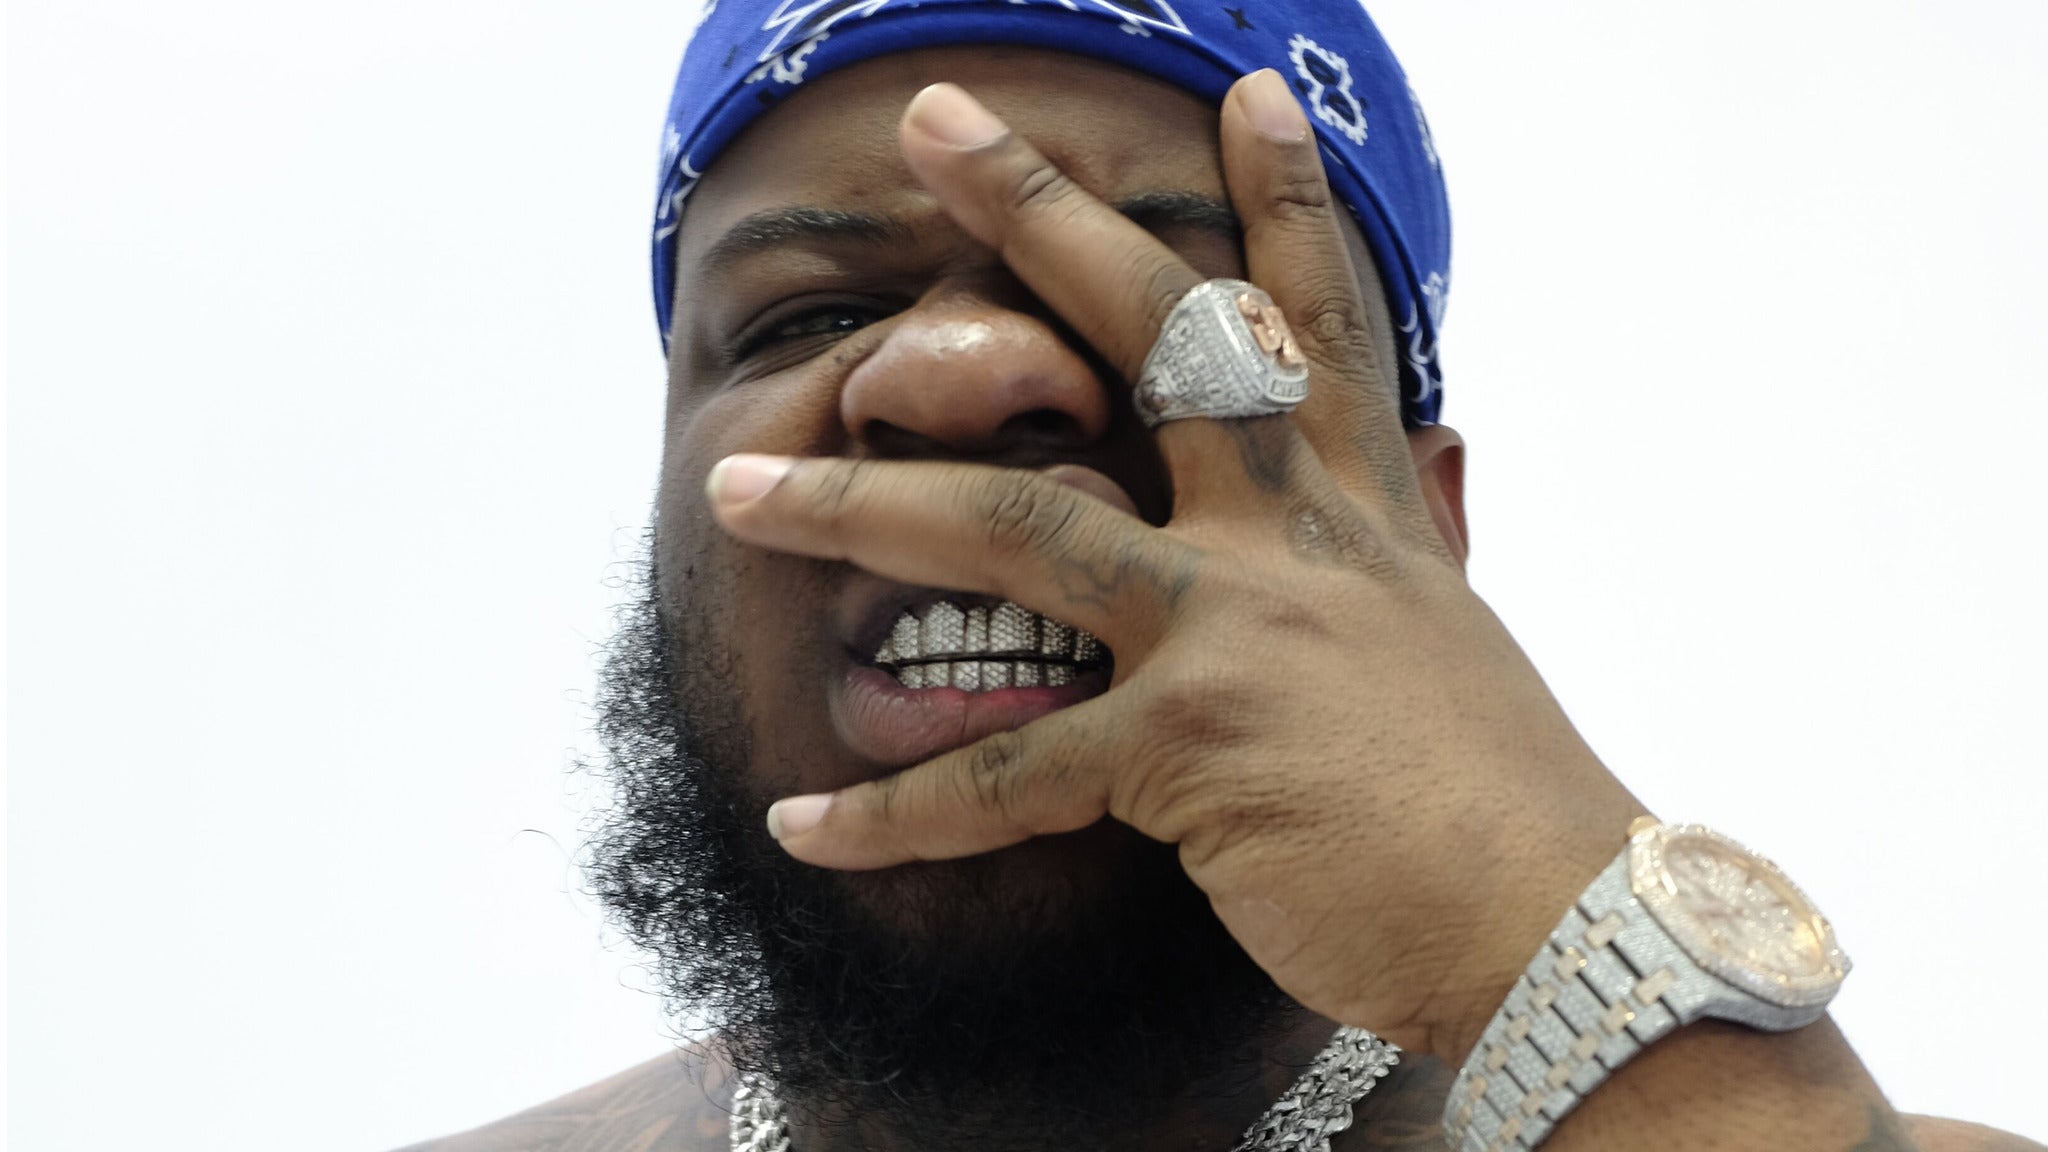 Maxo Kream - The Smokers Club Presents: The Big Persona Tour presale code for early tickets in New York